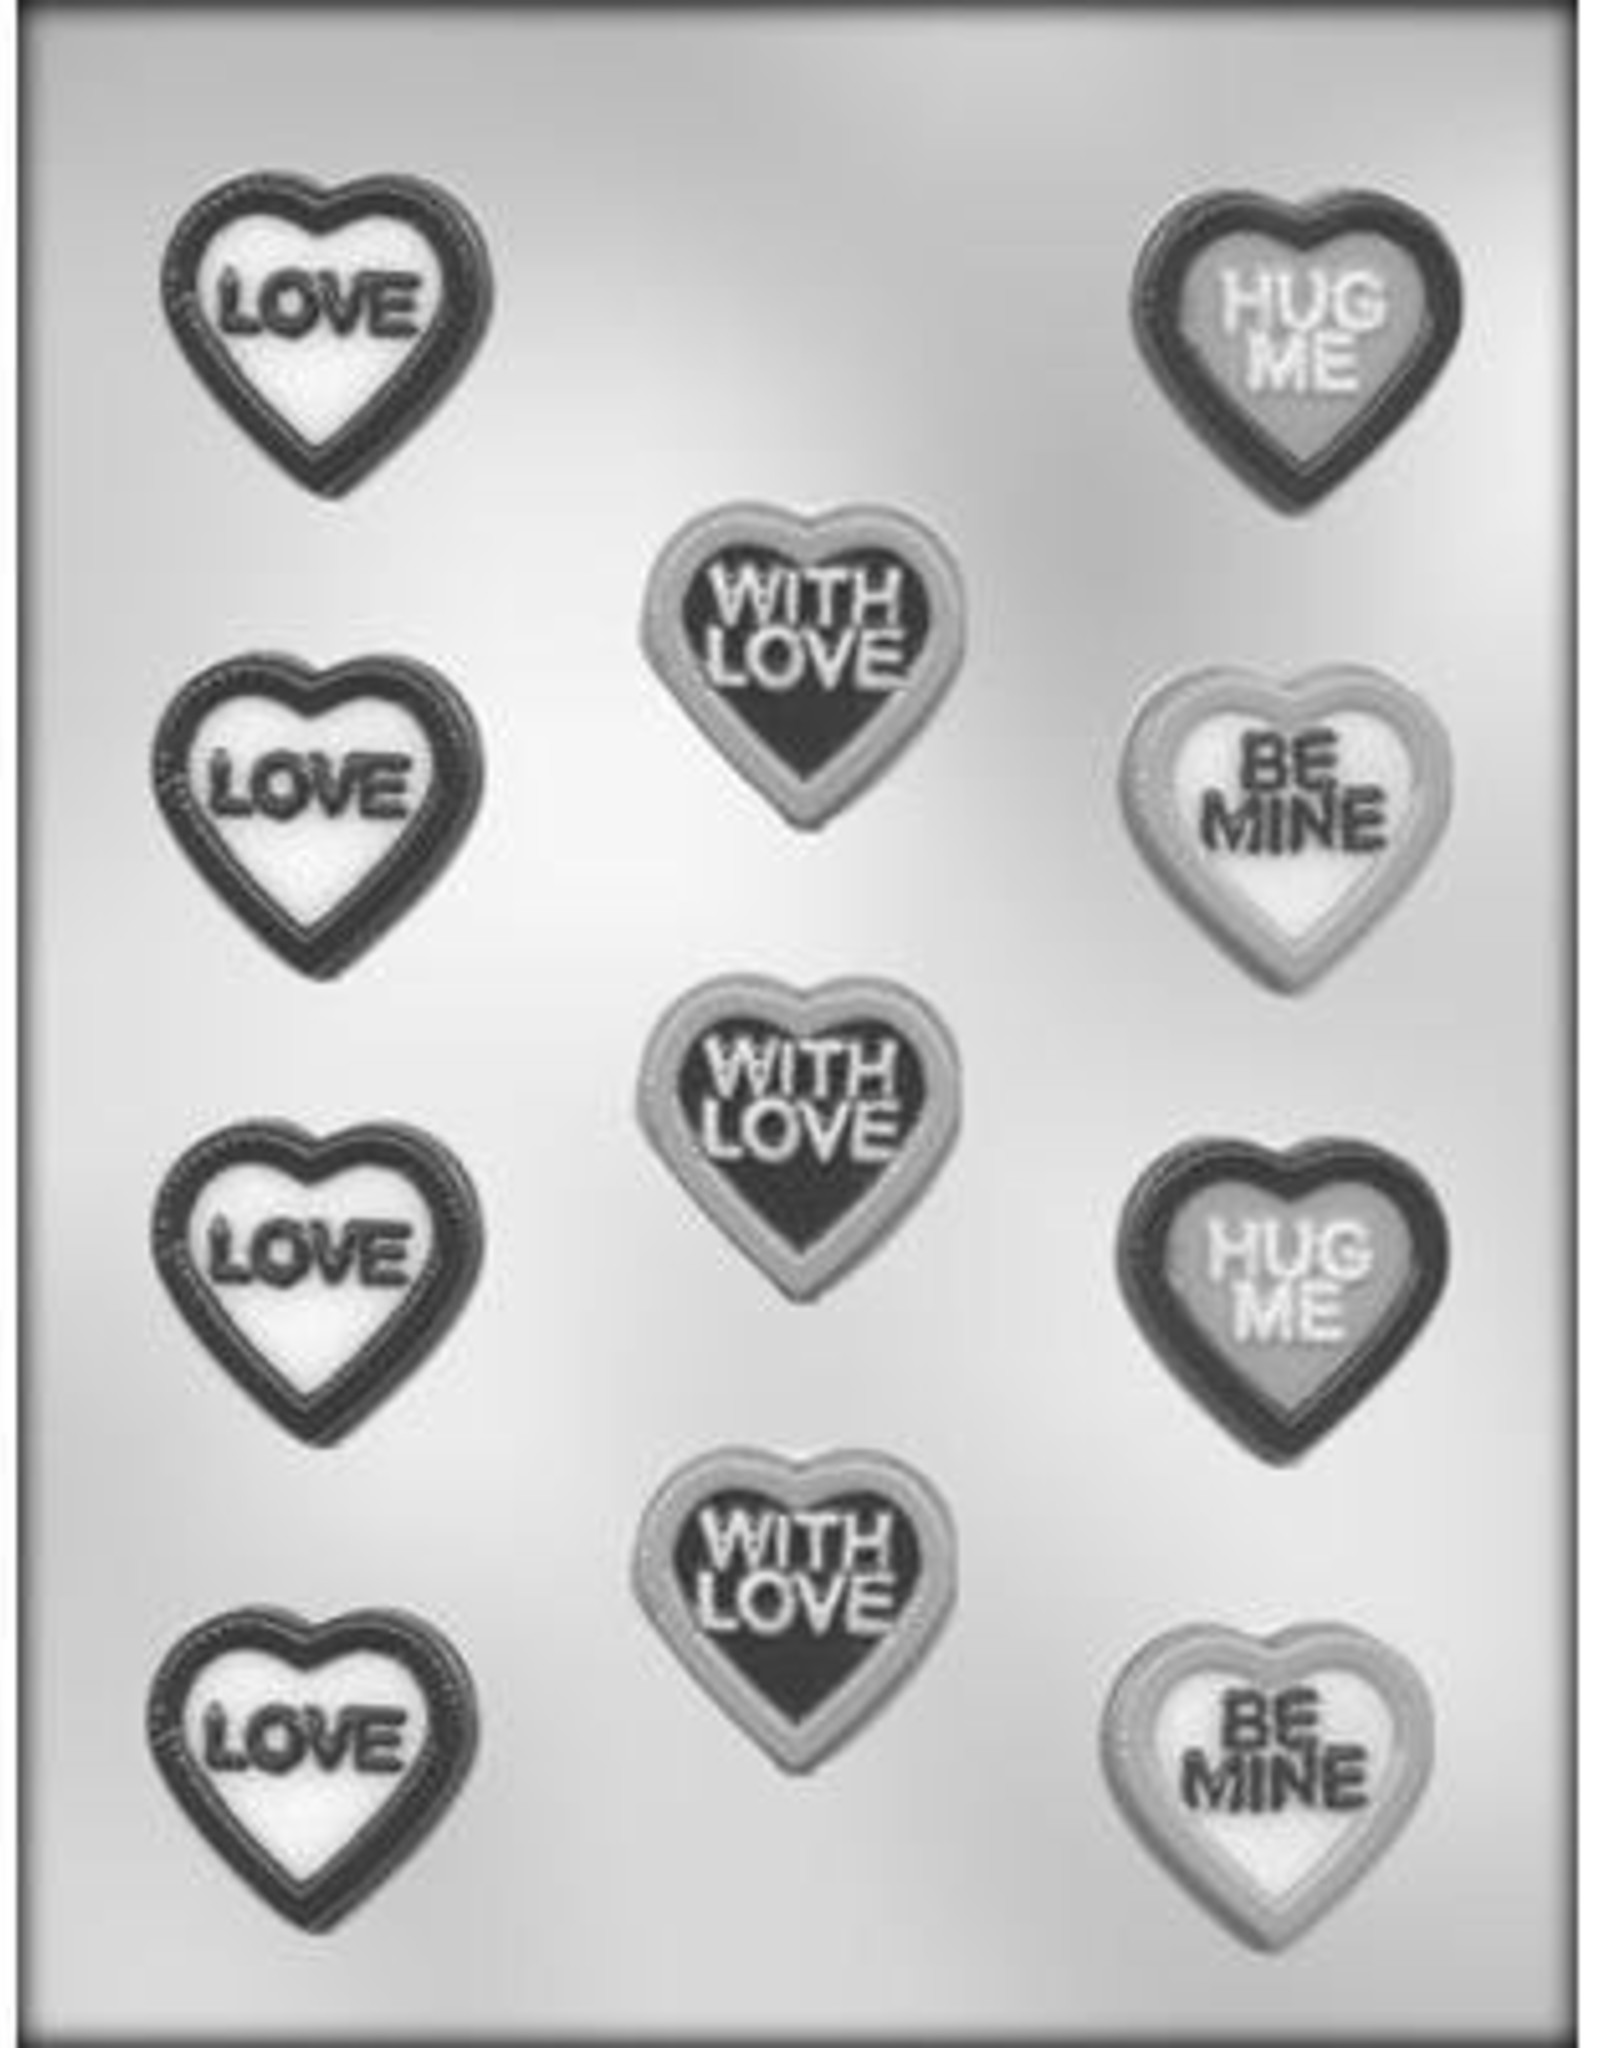 Heart with Message Chocolate Mold